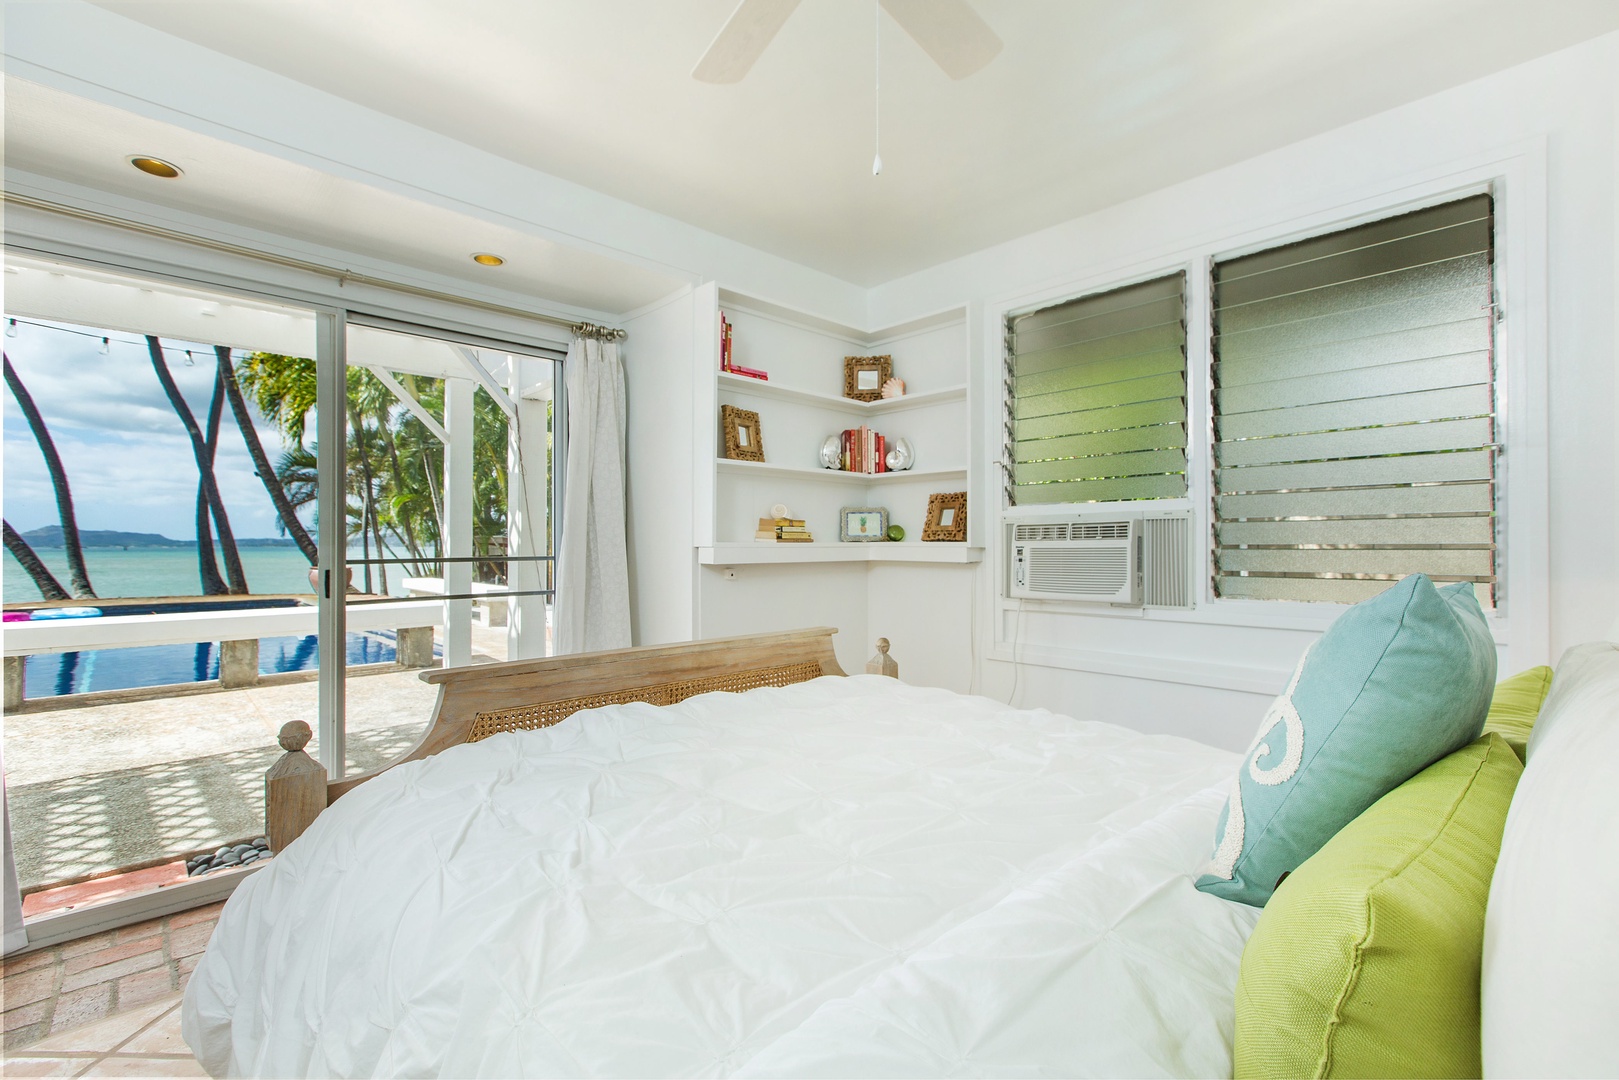 Honolulu Vacation Rentals, Hale Kai - Queen ocean view room with air conditioner.